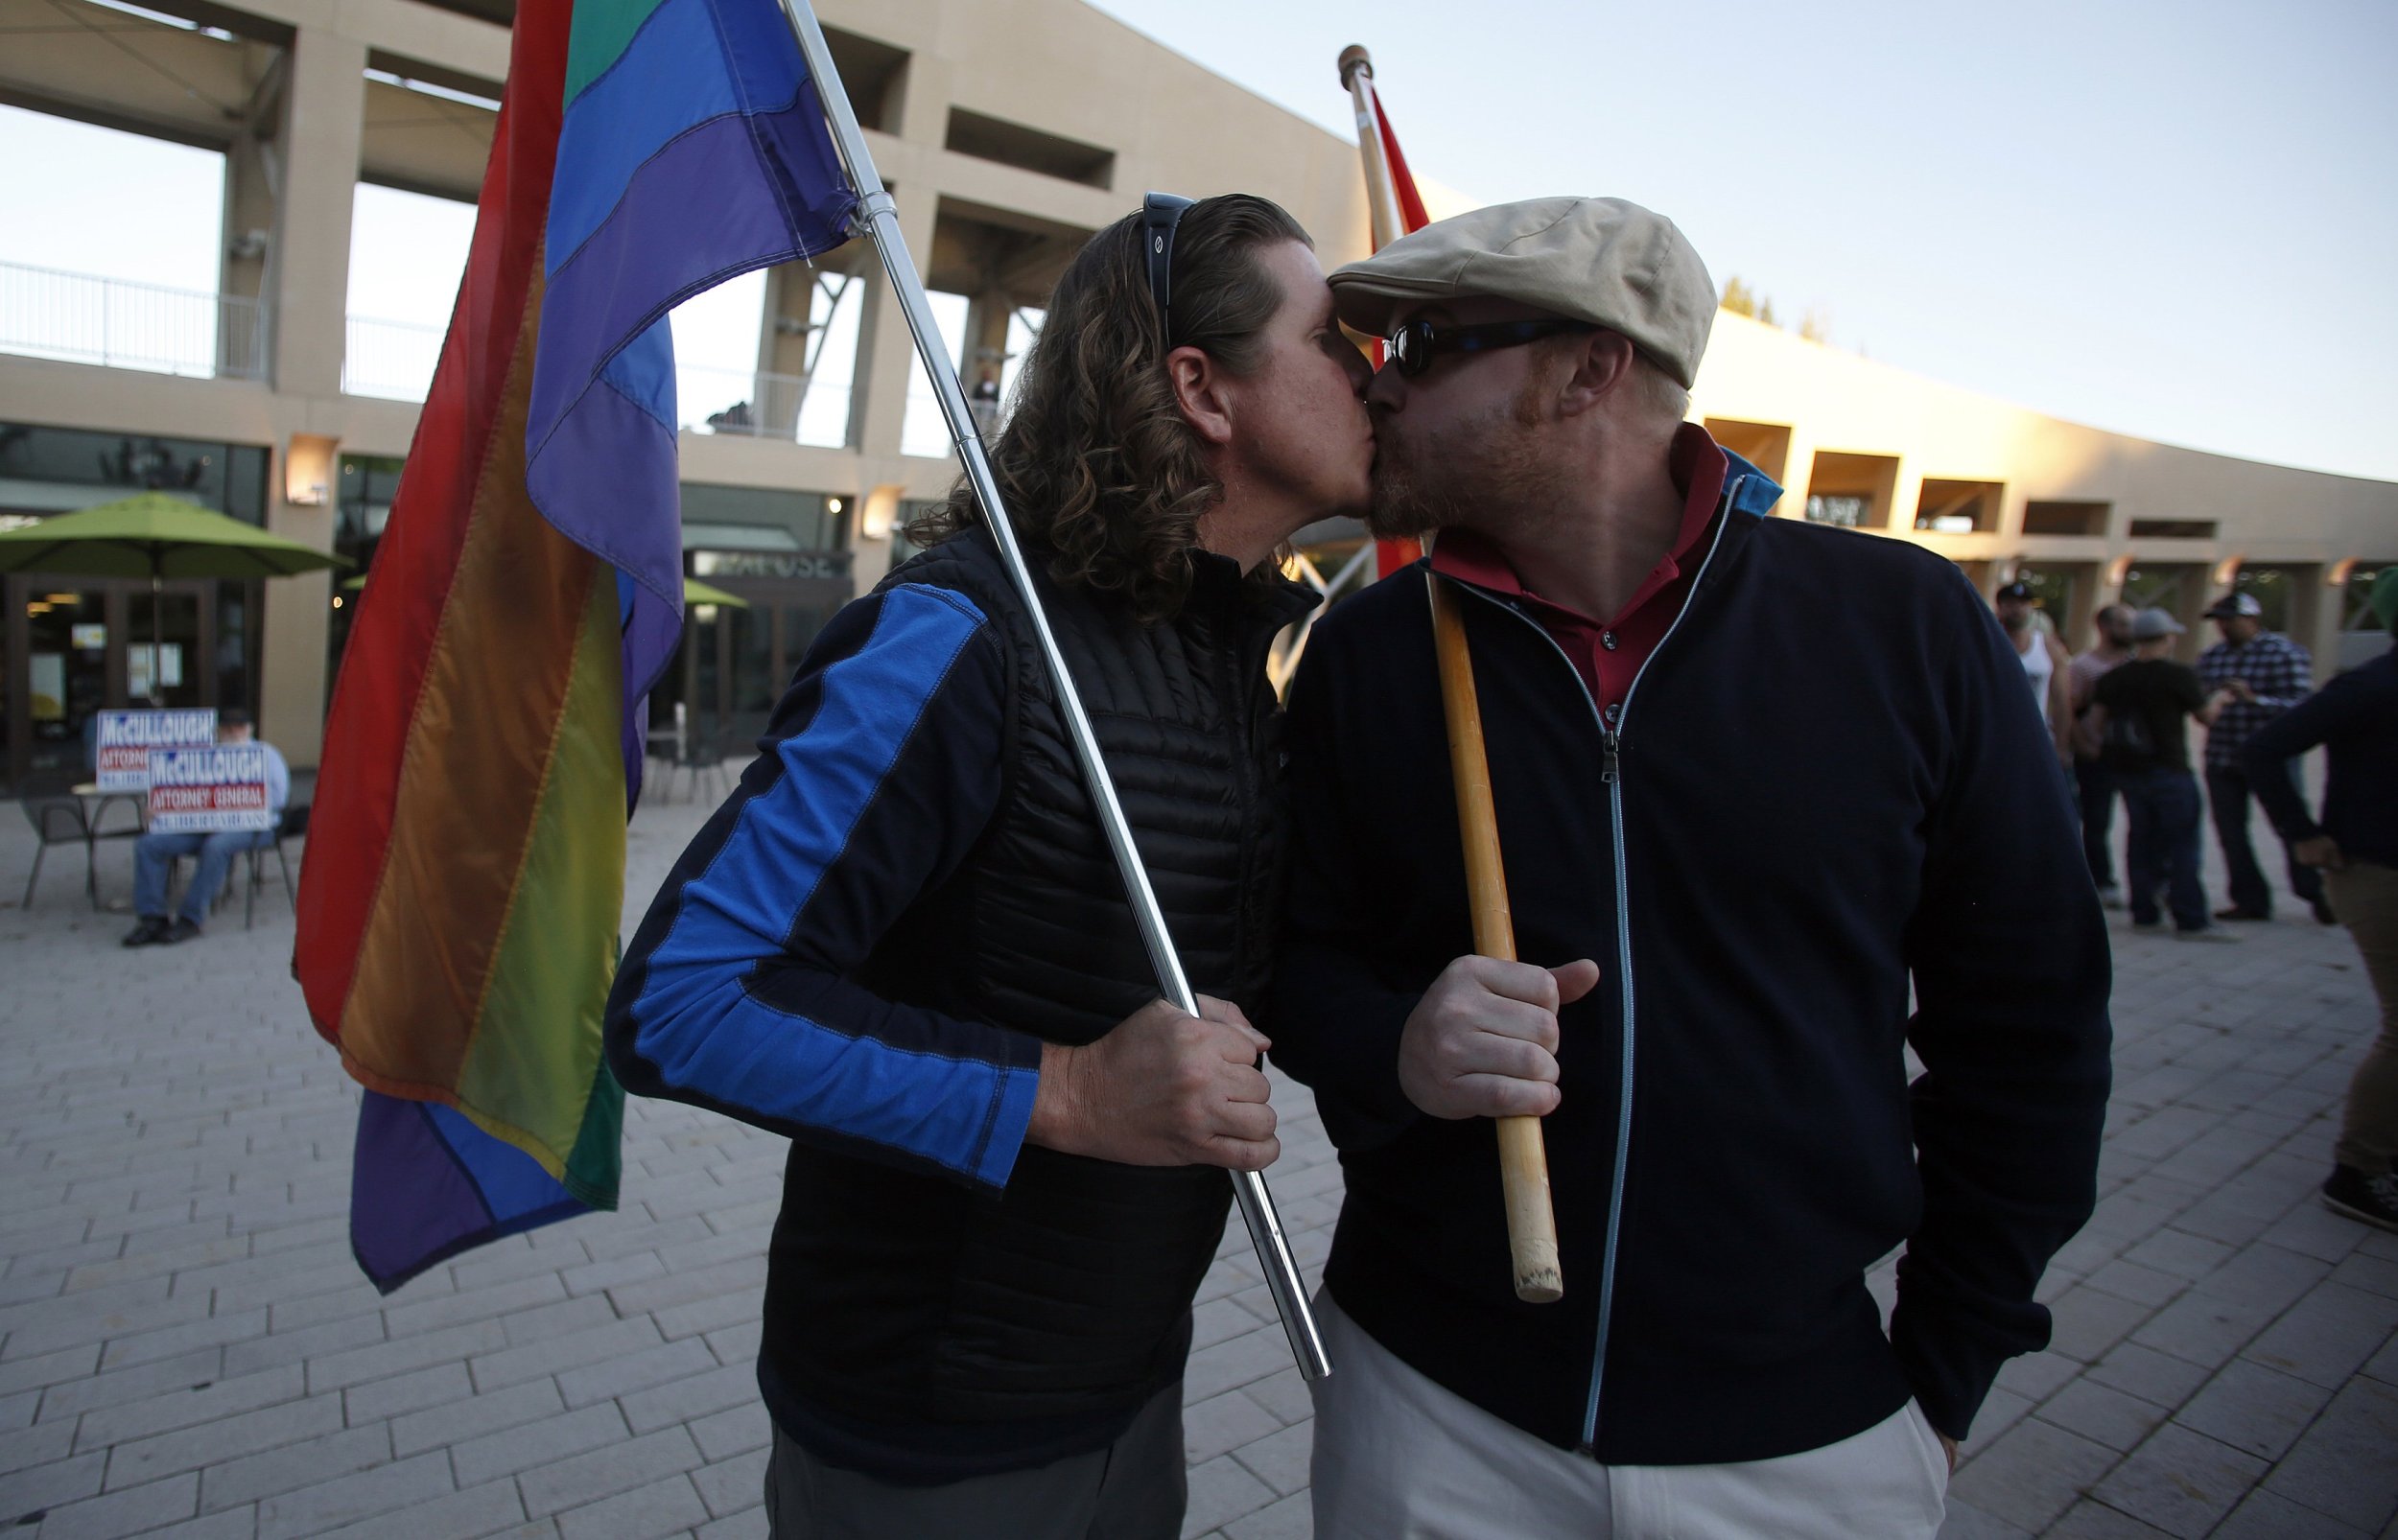 Mormons Accept Scotus Same Sex Marriage Decision While Catholic Church Gop Groups May Continue 